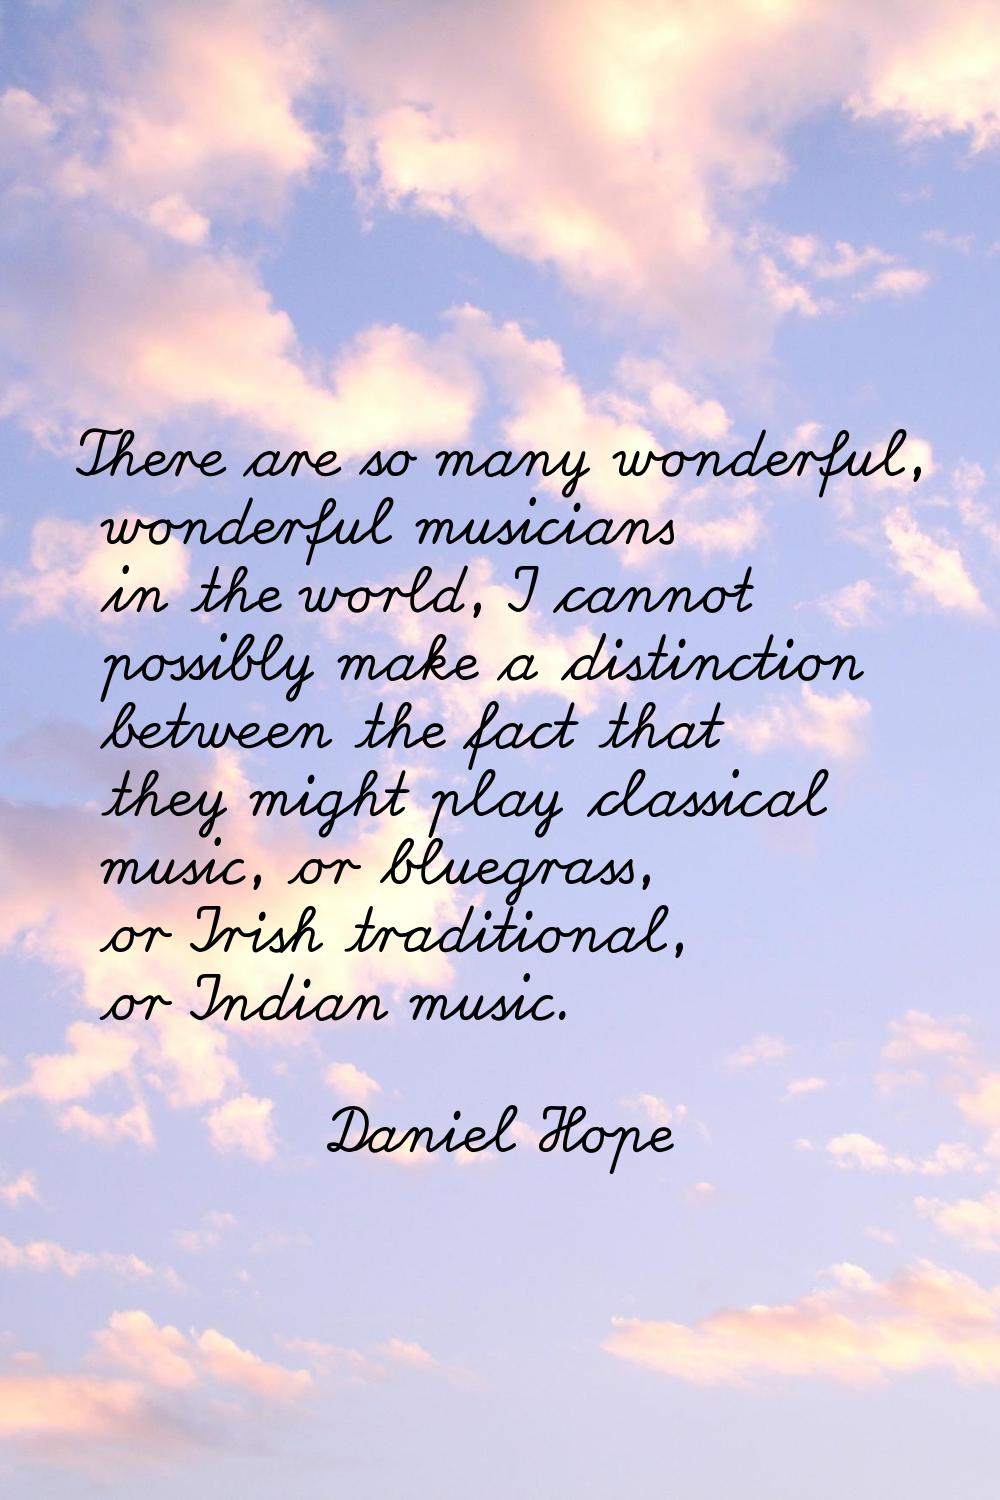 There are so many wonderful, wonderful musicians in the world, I cannot possibly make a distinction